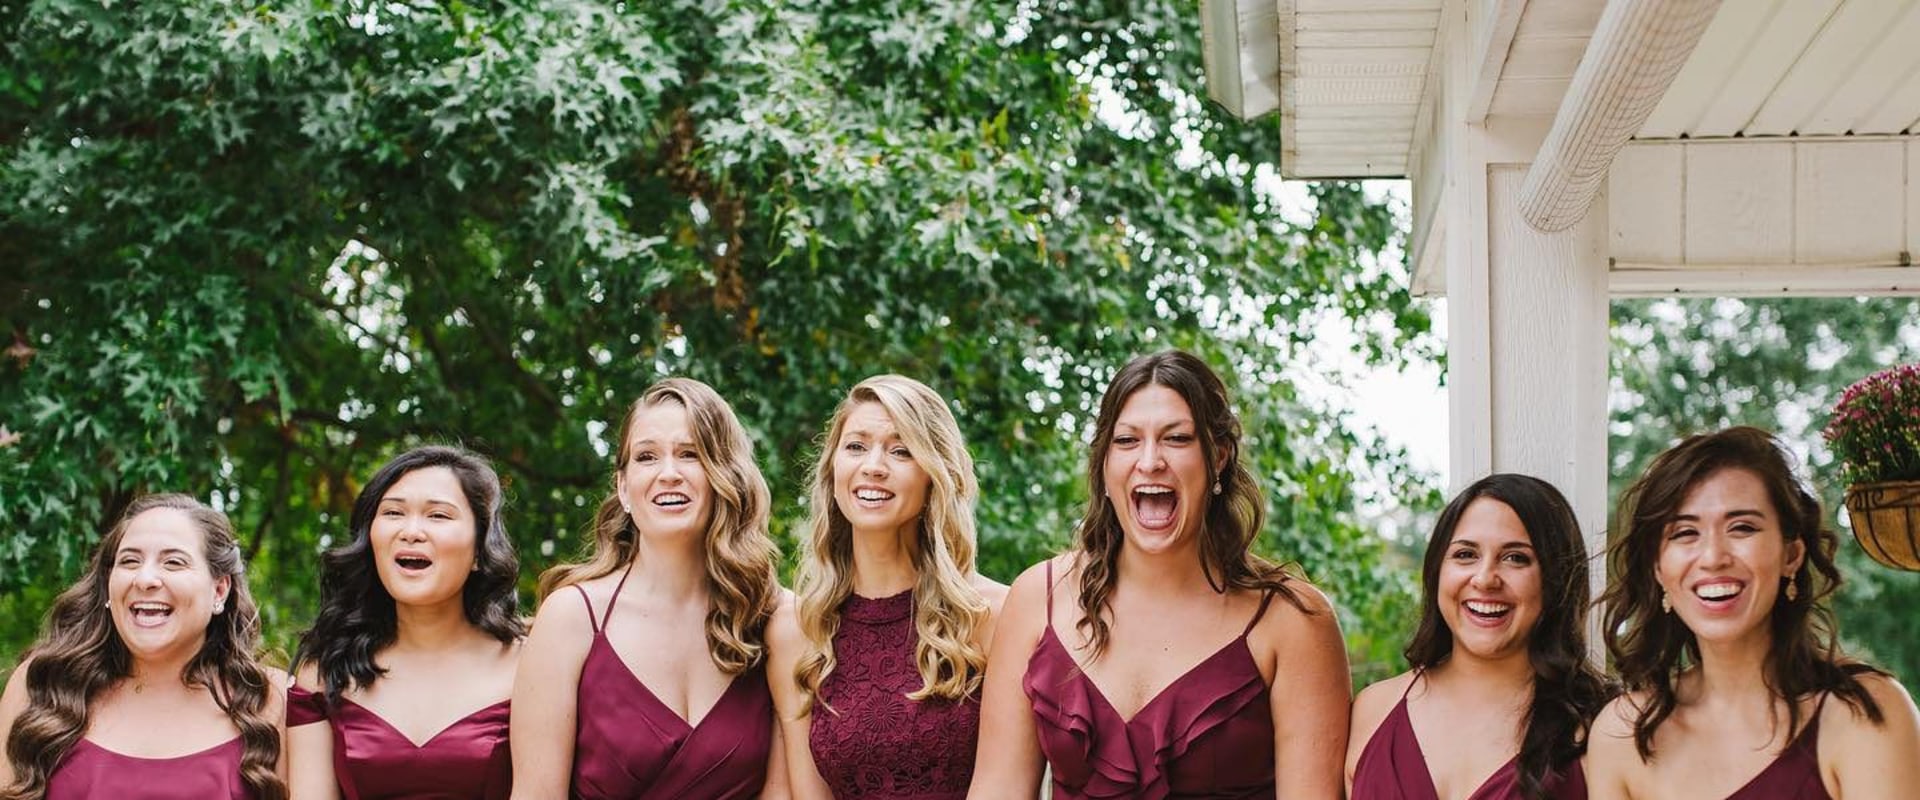 Burgundy: The Perfect Color for Bridesmaid Dresses